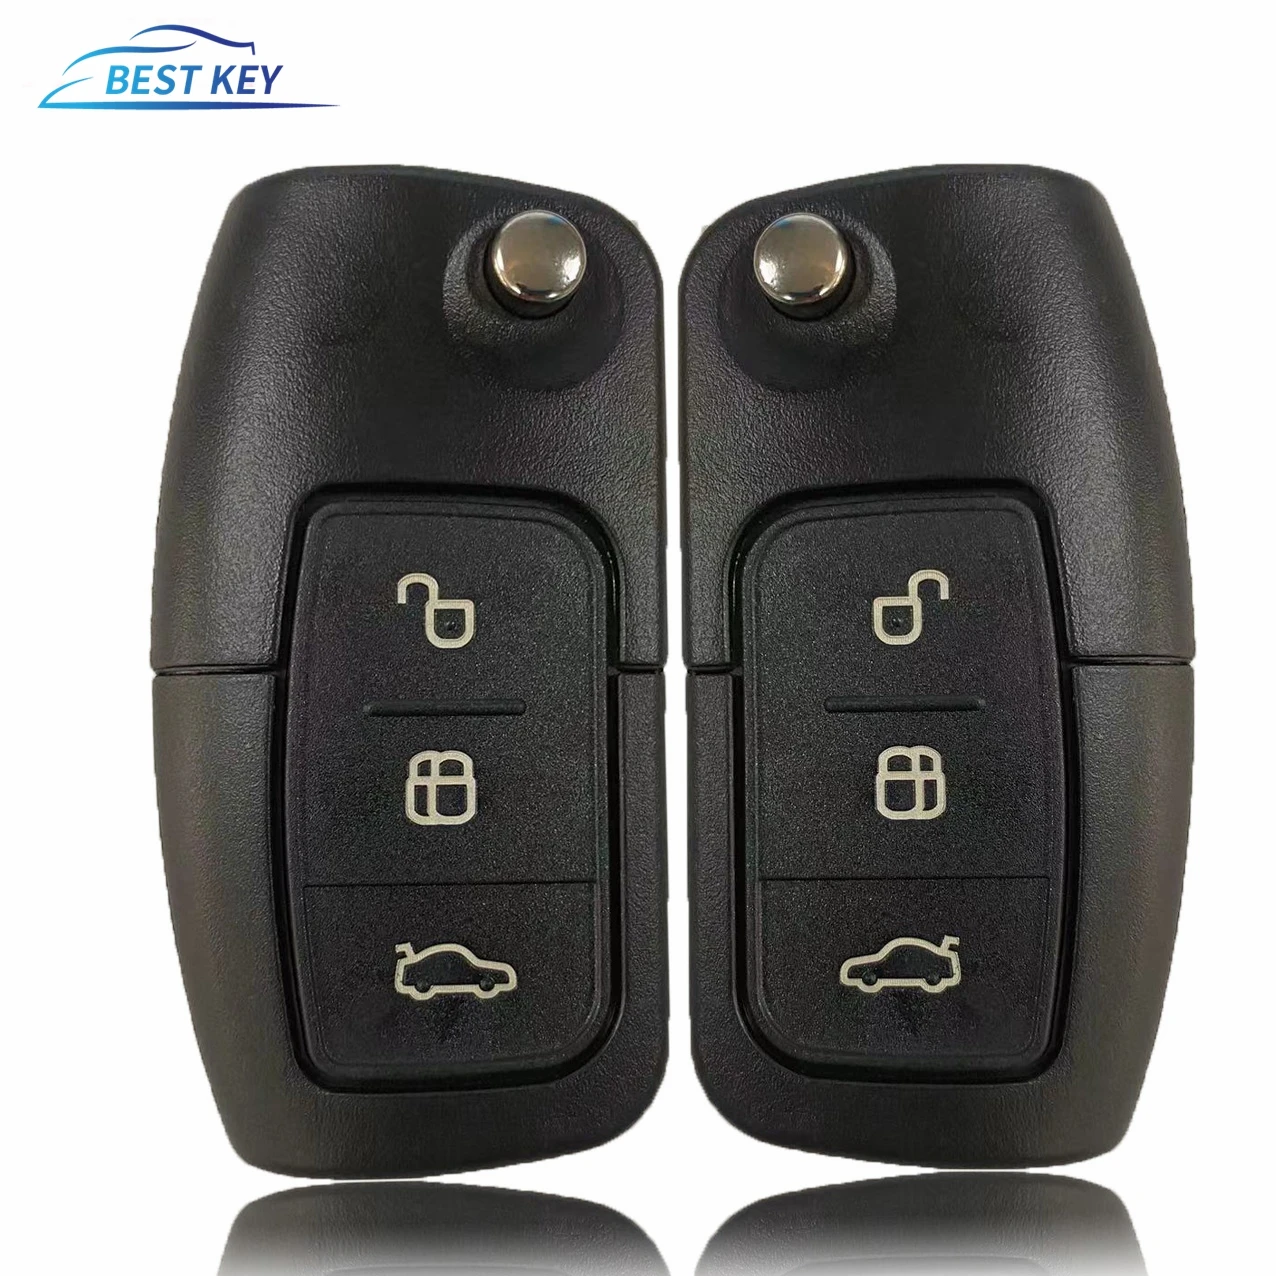 BEST For Ford Fusion Focus Mondeo Fiesta Galaxy 3 Button Remote Key With Uncut Blade Remote Locking Fob